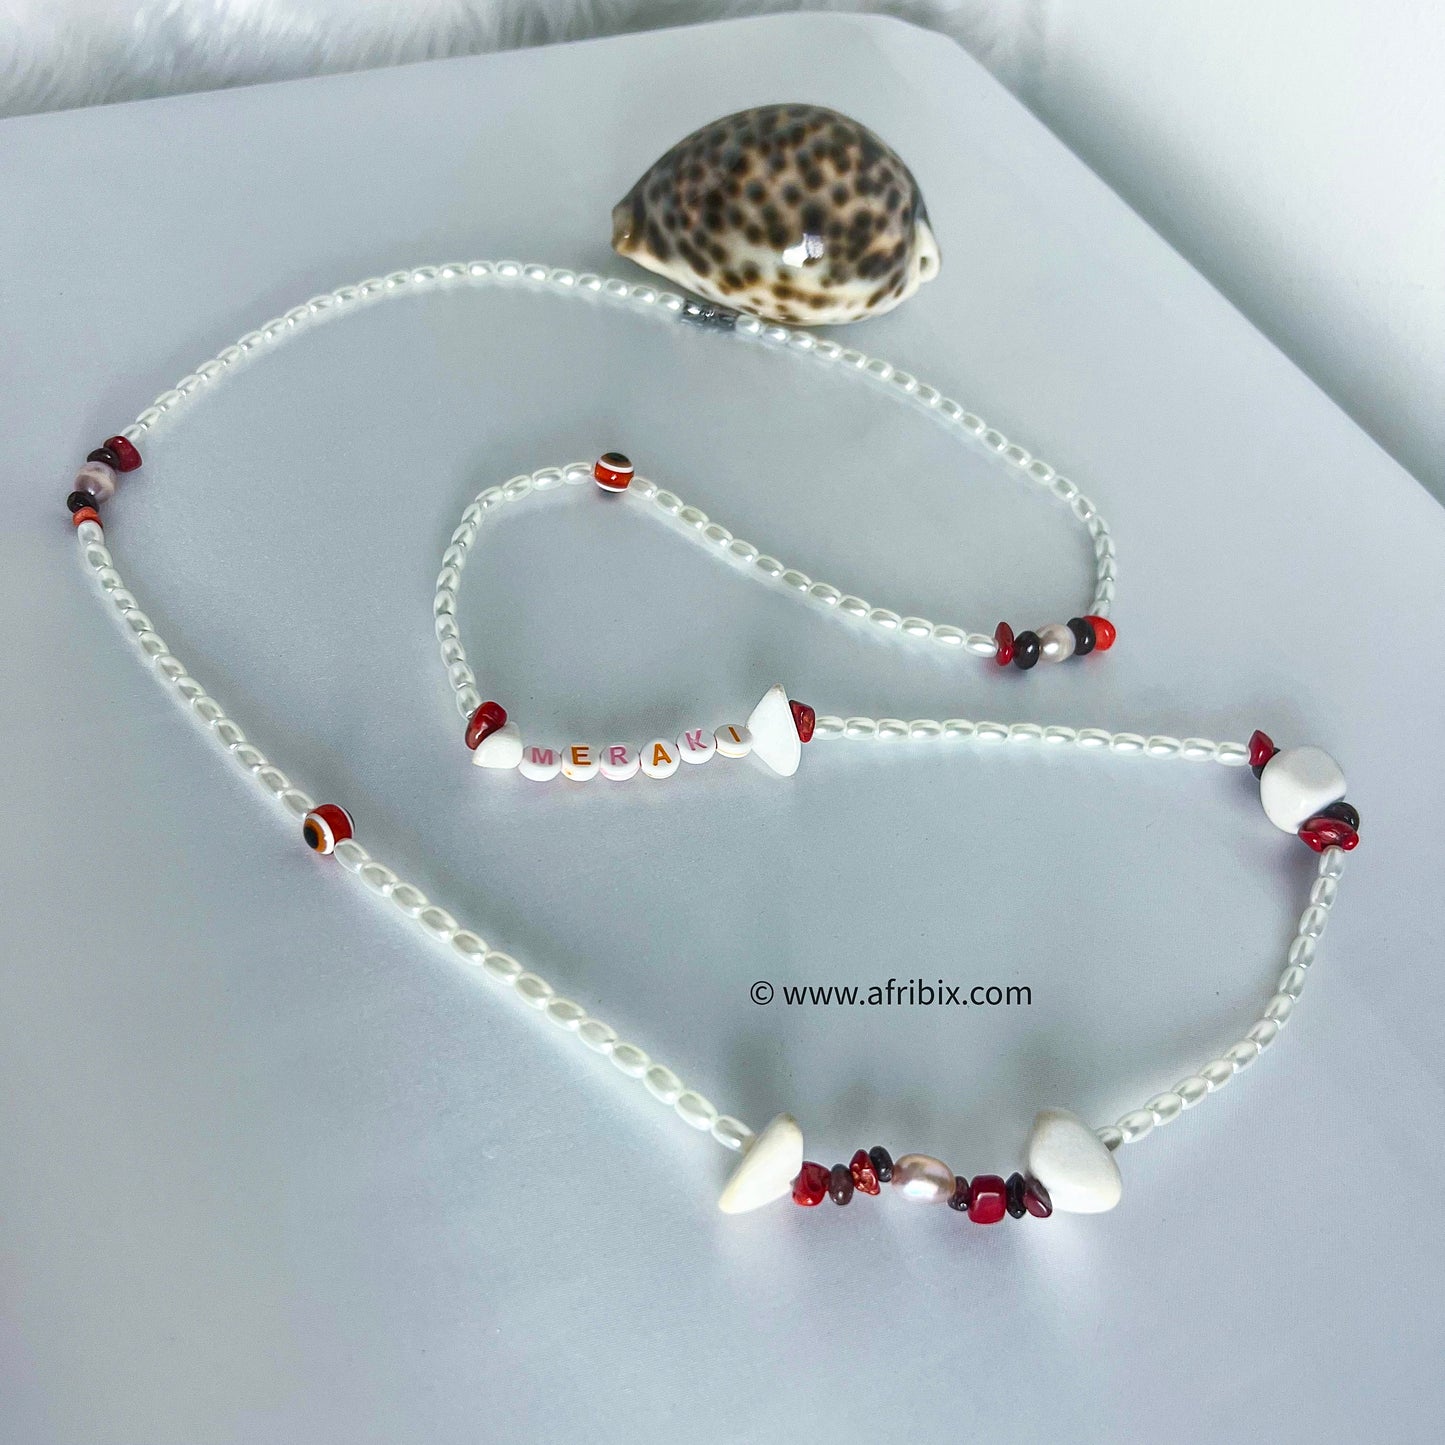 Meraki Limited Edition Ivory, Pearl, Coral and Garnet Belly Chain Waistbead